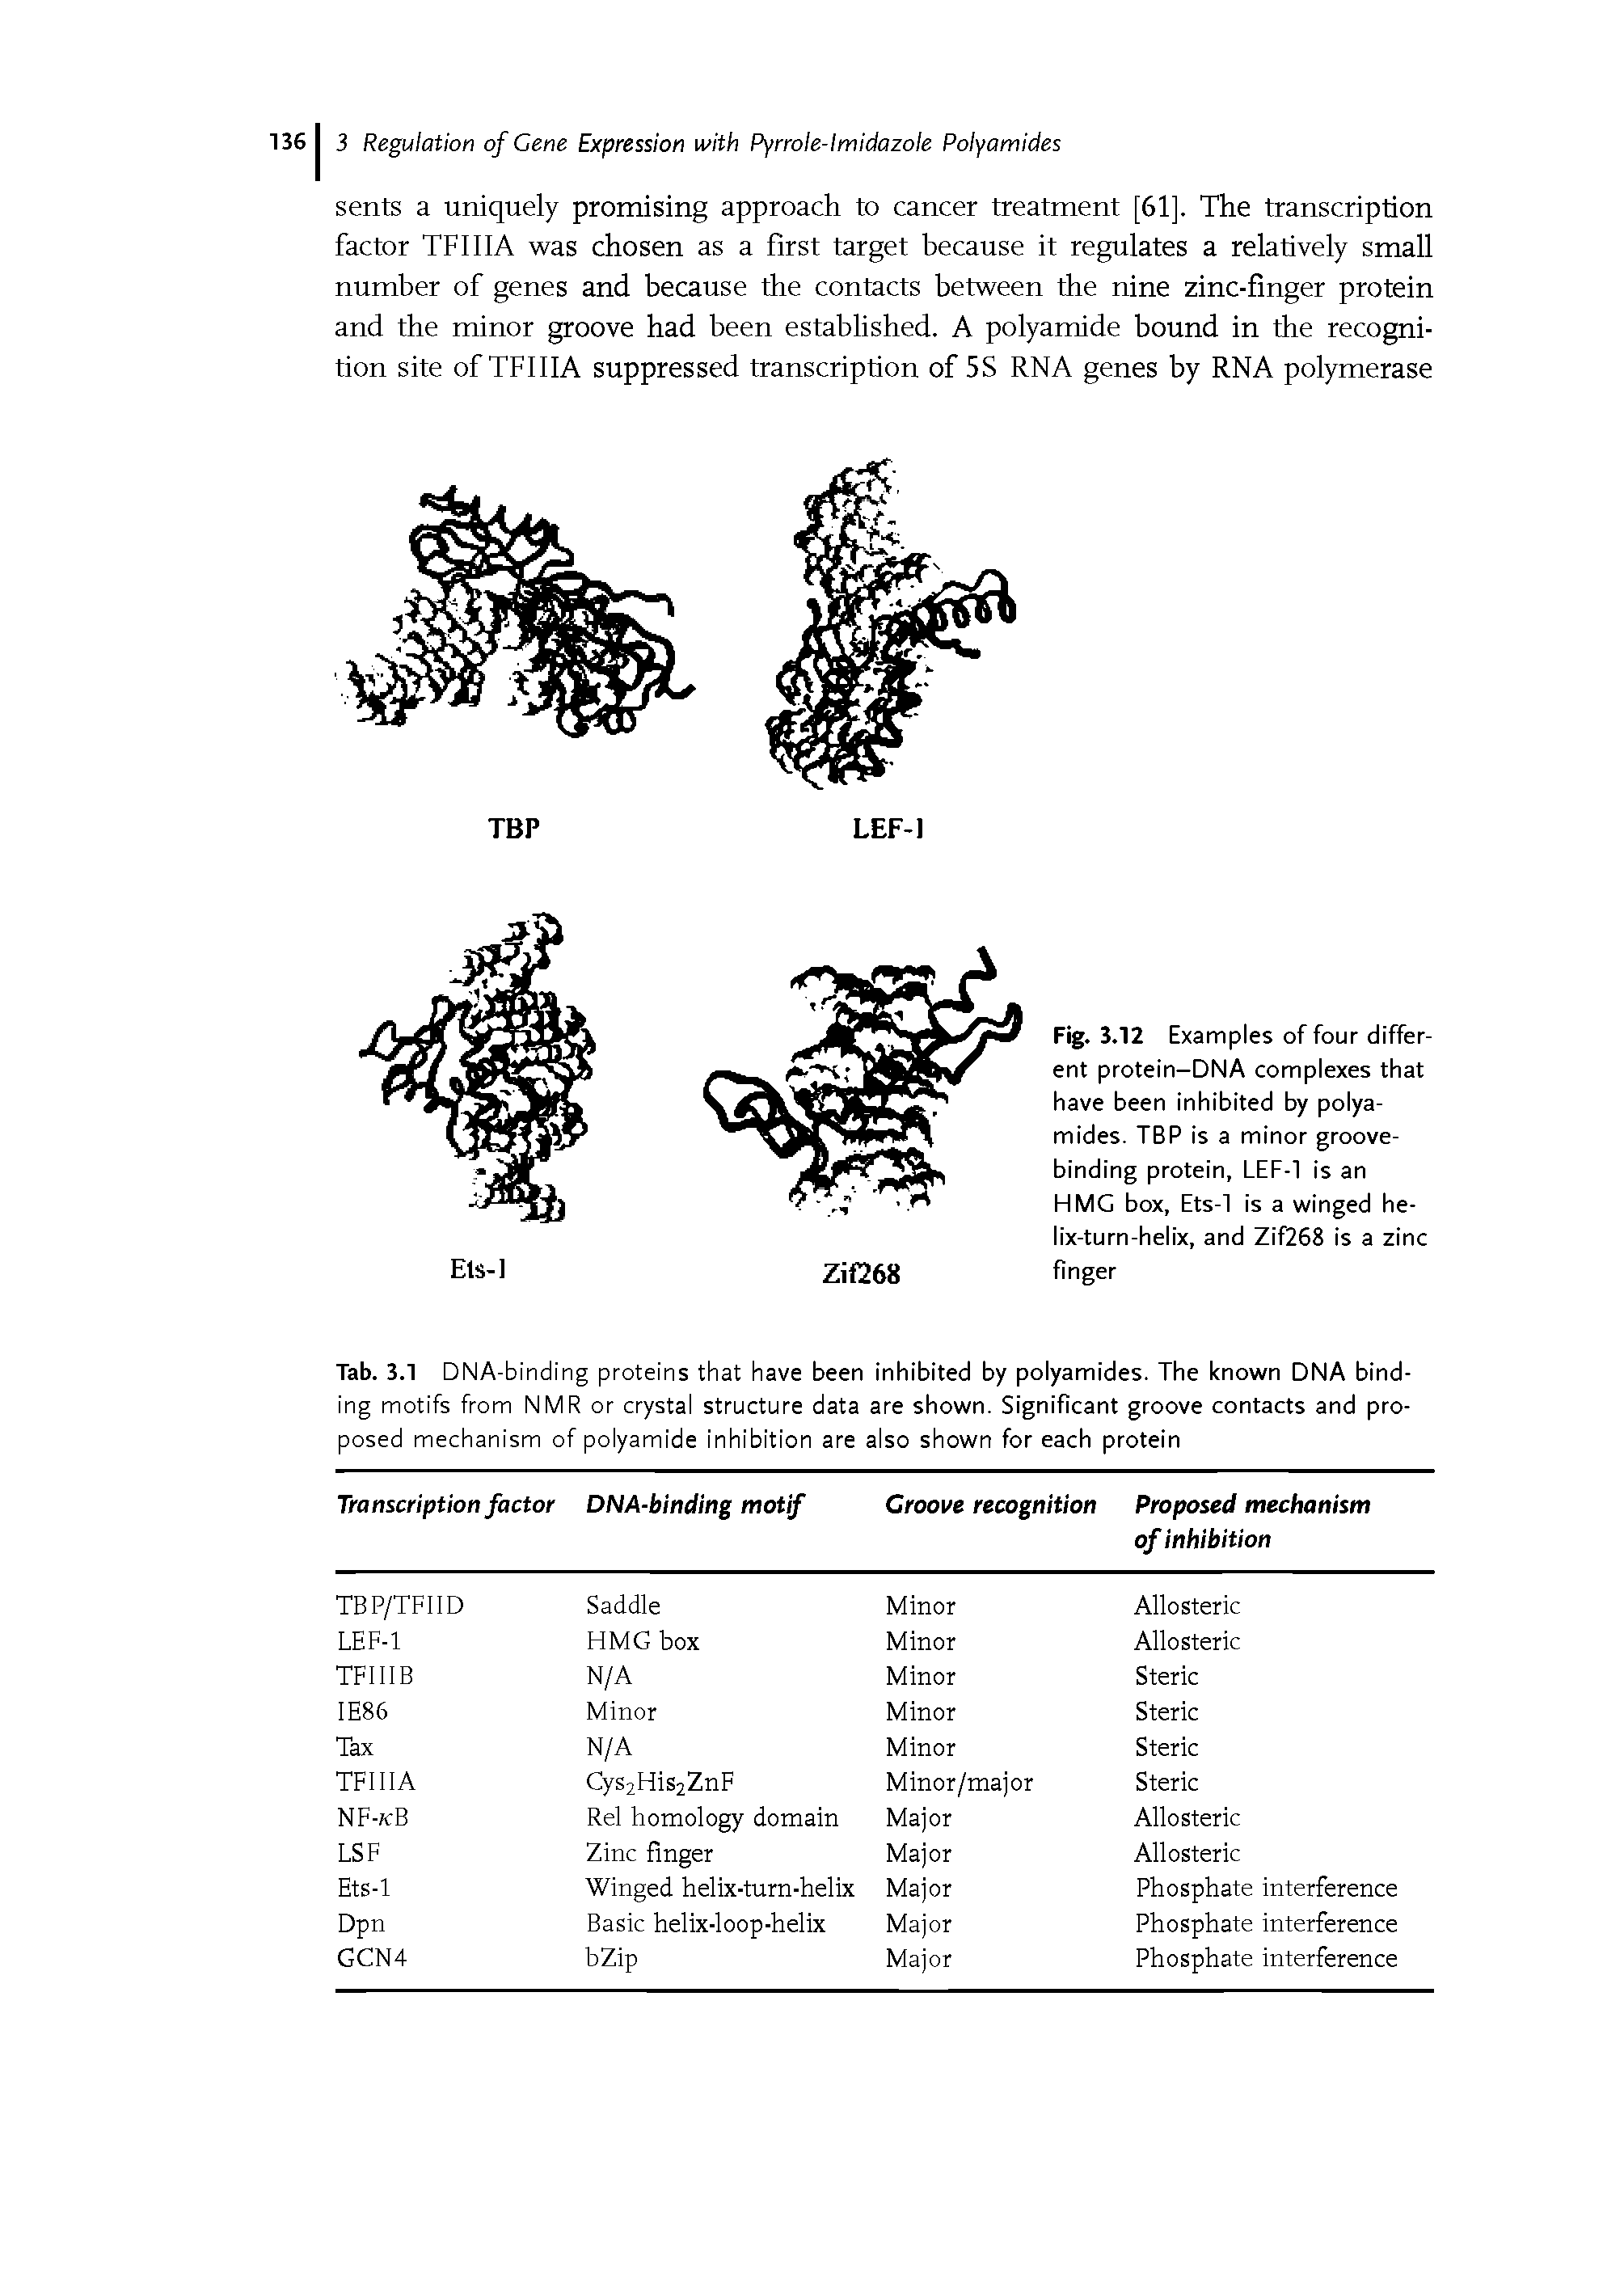 Tab. 3.1 DNA-binding proteins that have been inhibited by polyamides. The known DNA binding motifs from NMR or crystal structure data are shown. Significant groove contacts and proposed mechanism of polyamide inhibition are also shown for each protein...